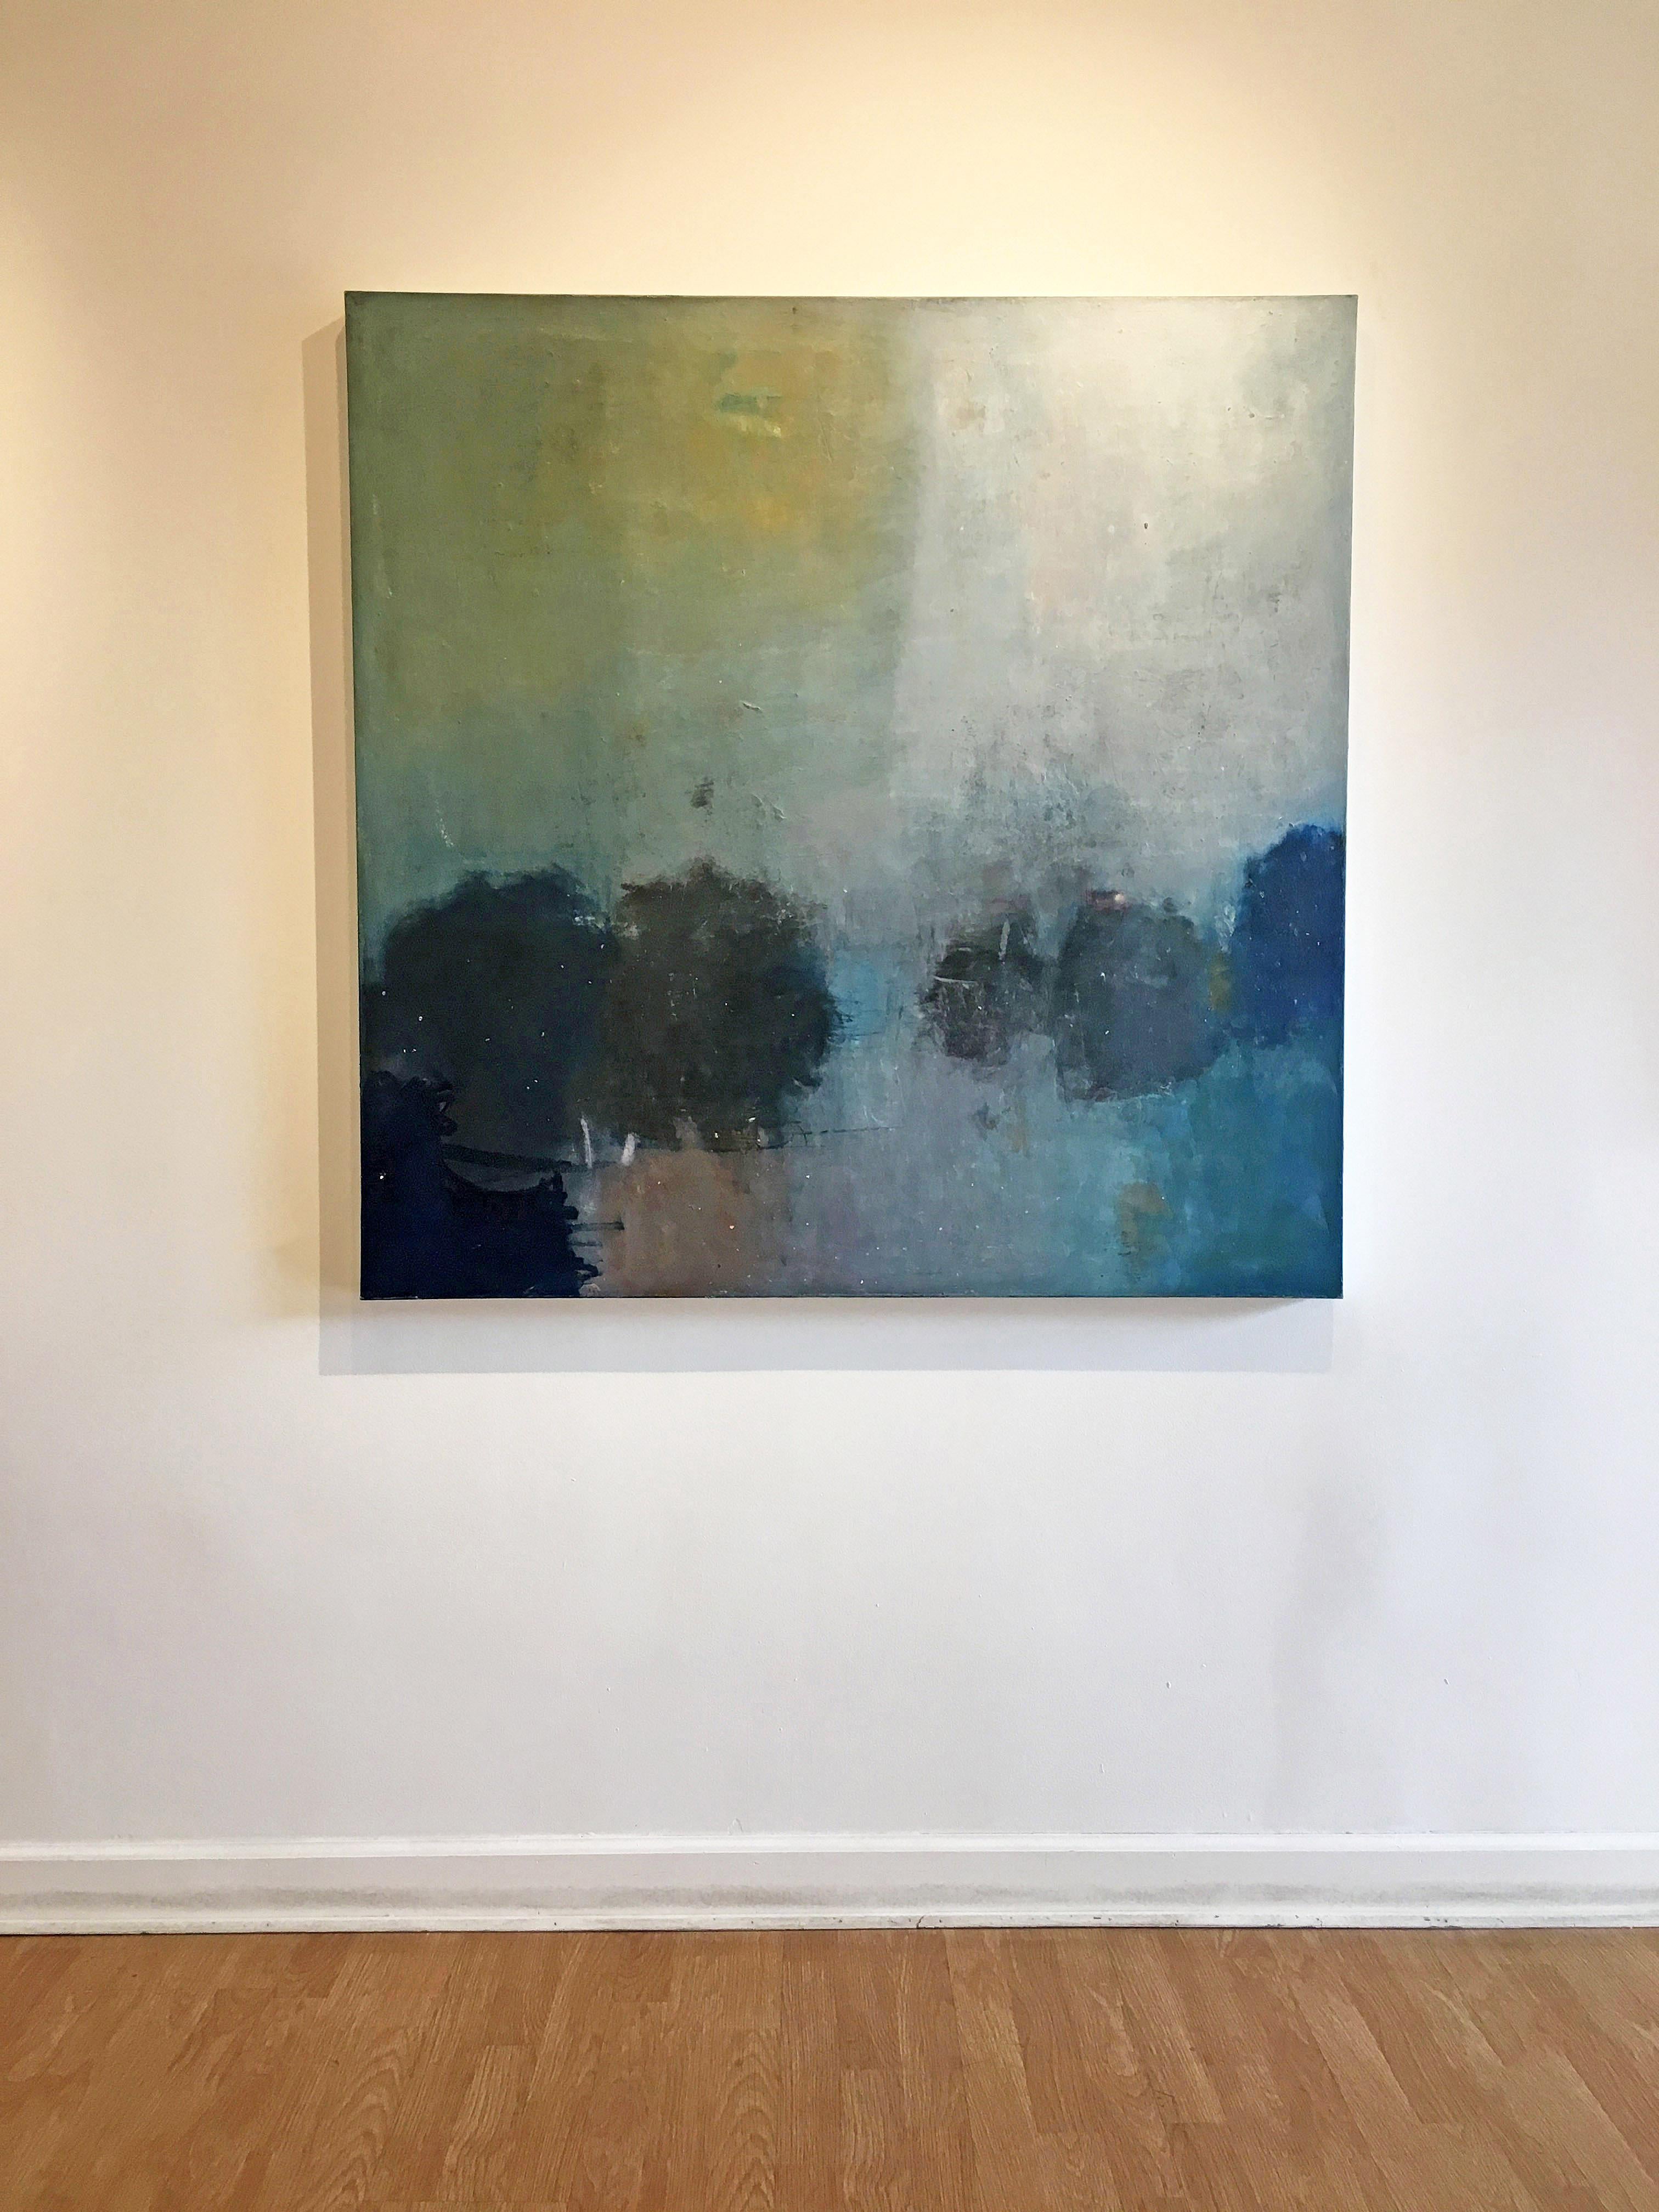 'The 5 of Us' in 2018 by New York City base, French artist Sandrine Kern. Oil and cold wax on canvas, 48 x 48 in. This abstracted landscape painting features a forest scene in colors of green, blue, brown, black, white, and hints of pink.

Sandrine